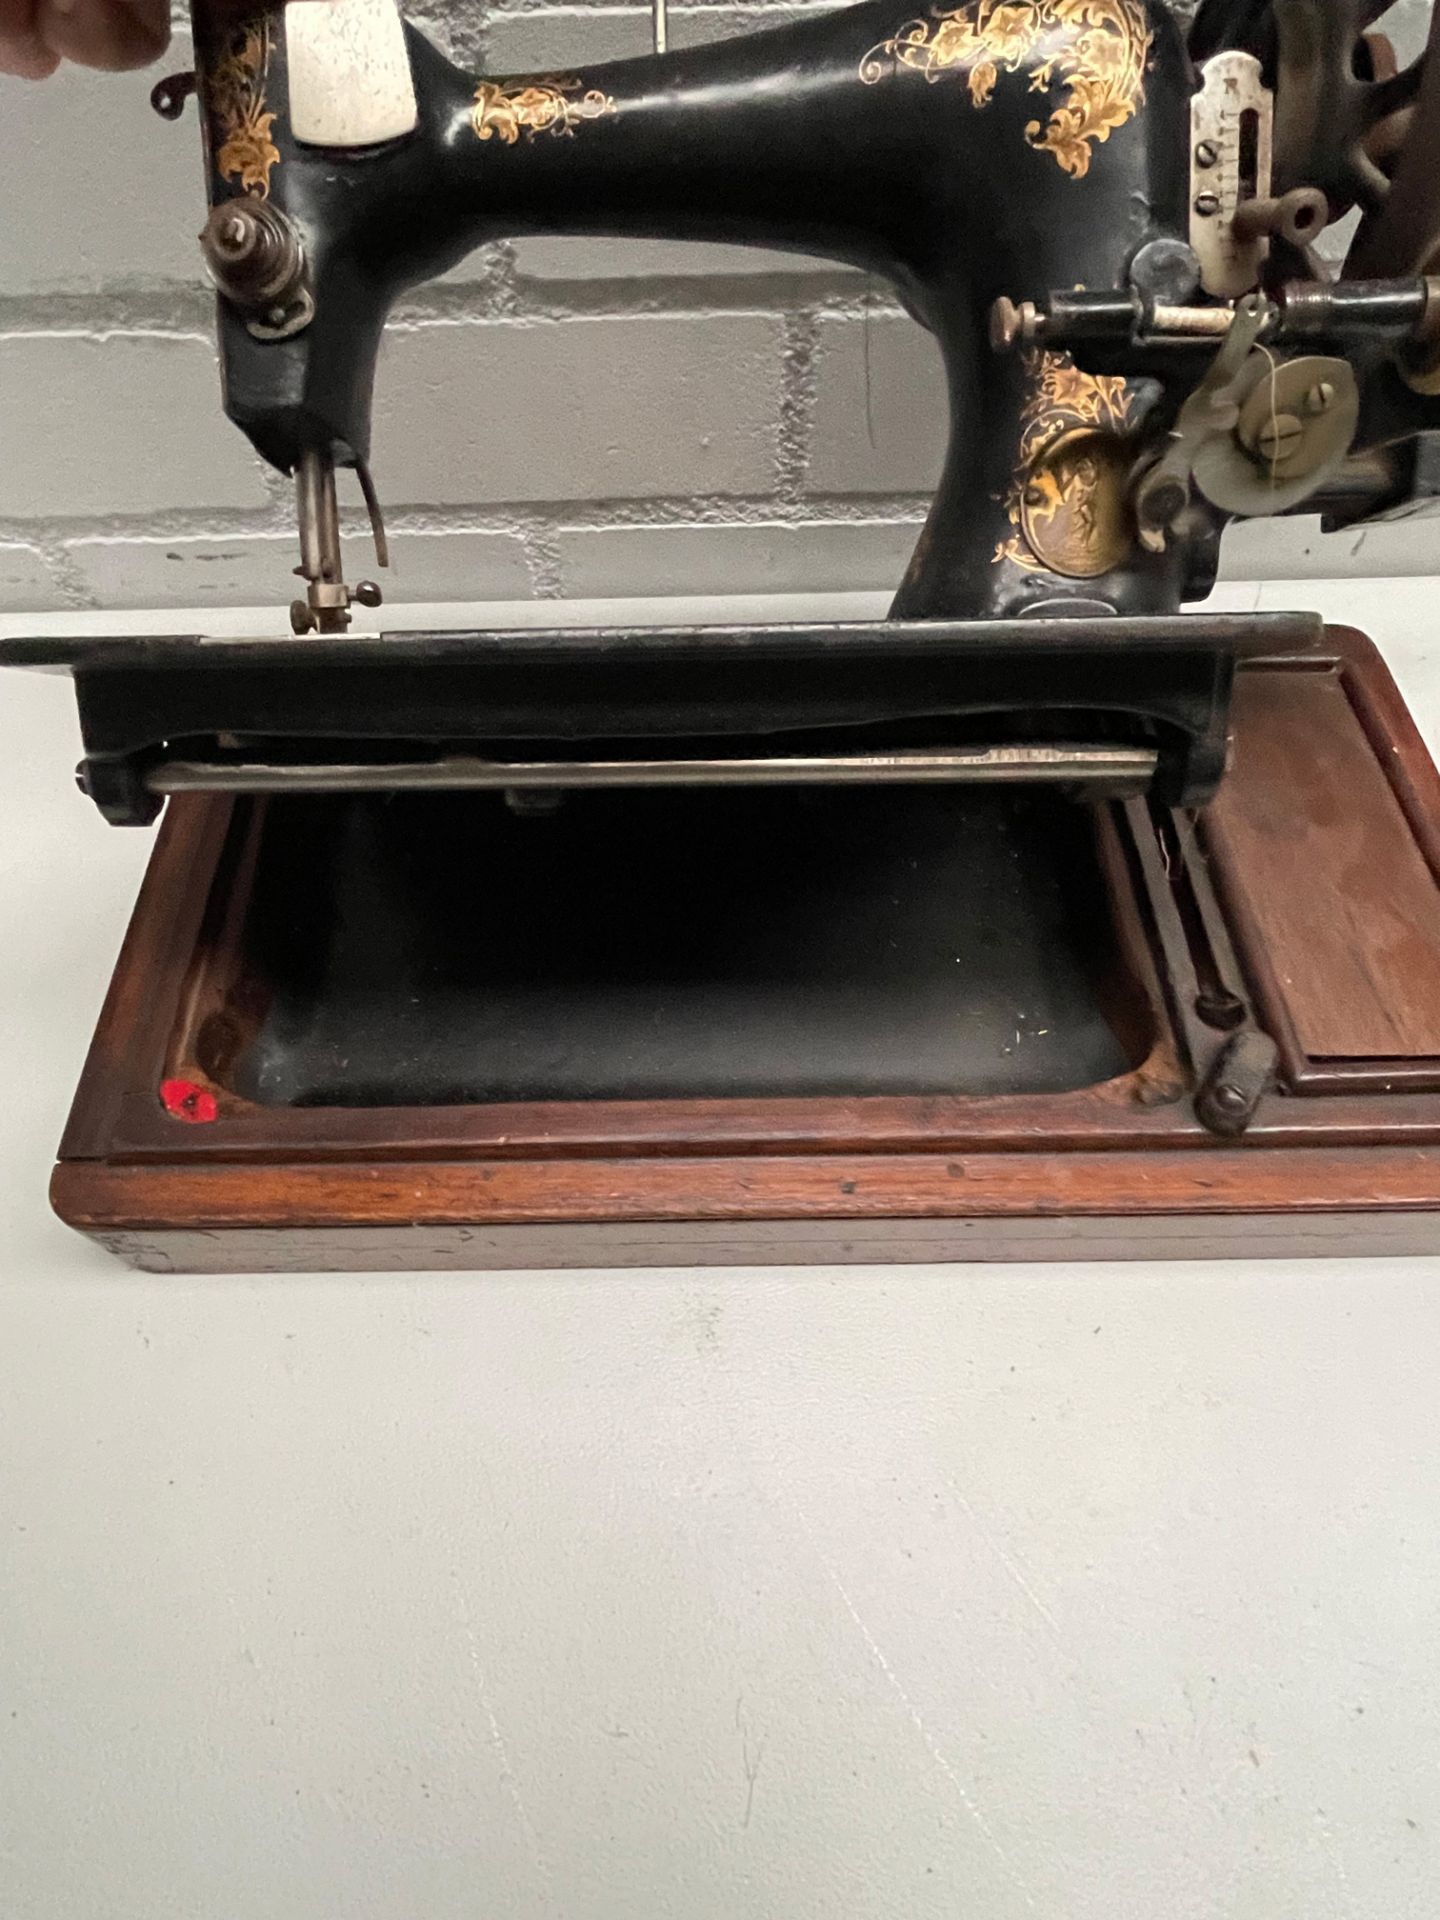 Vintage Cast Iron Sewing Machine - Image 11 of 11